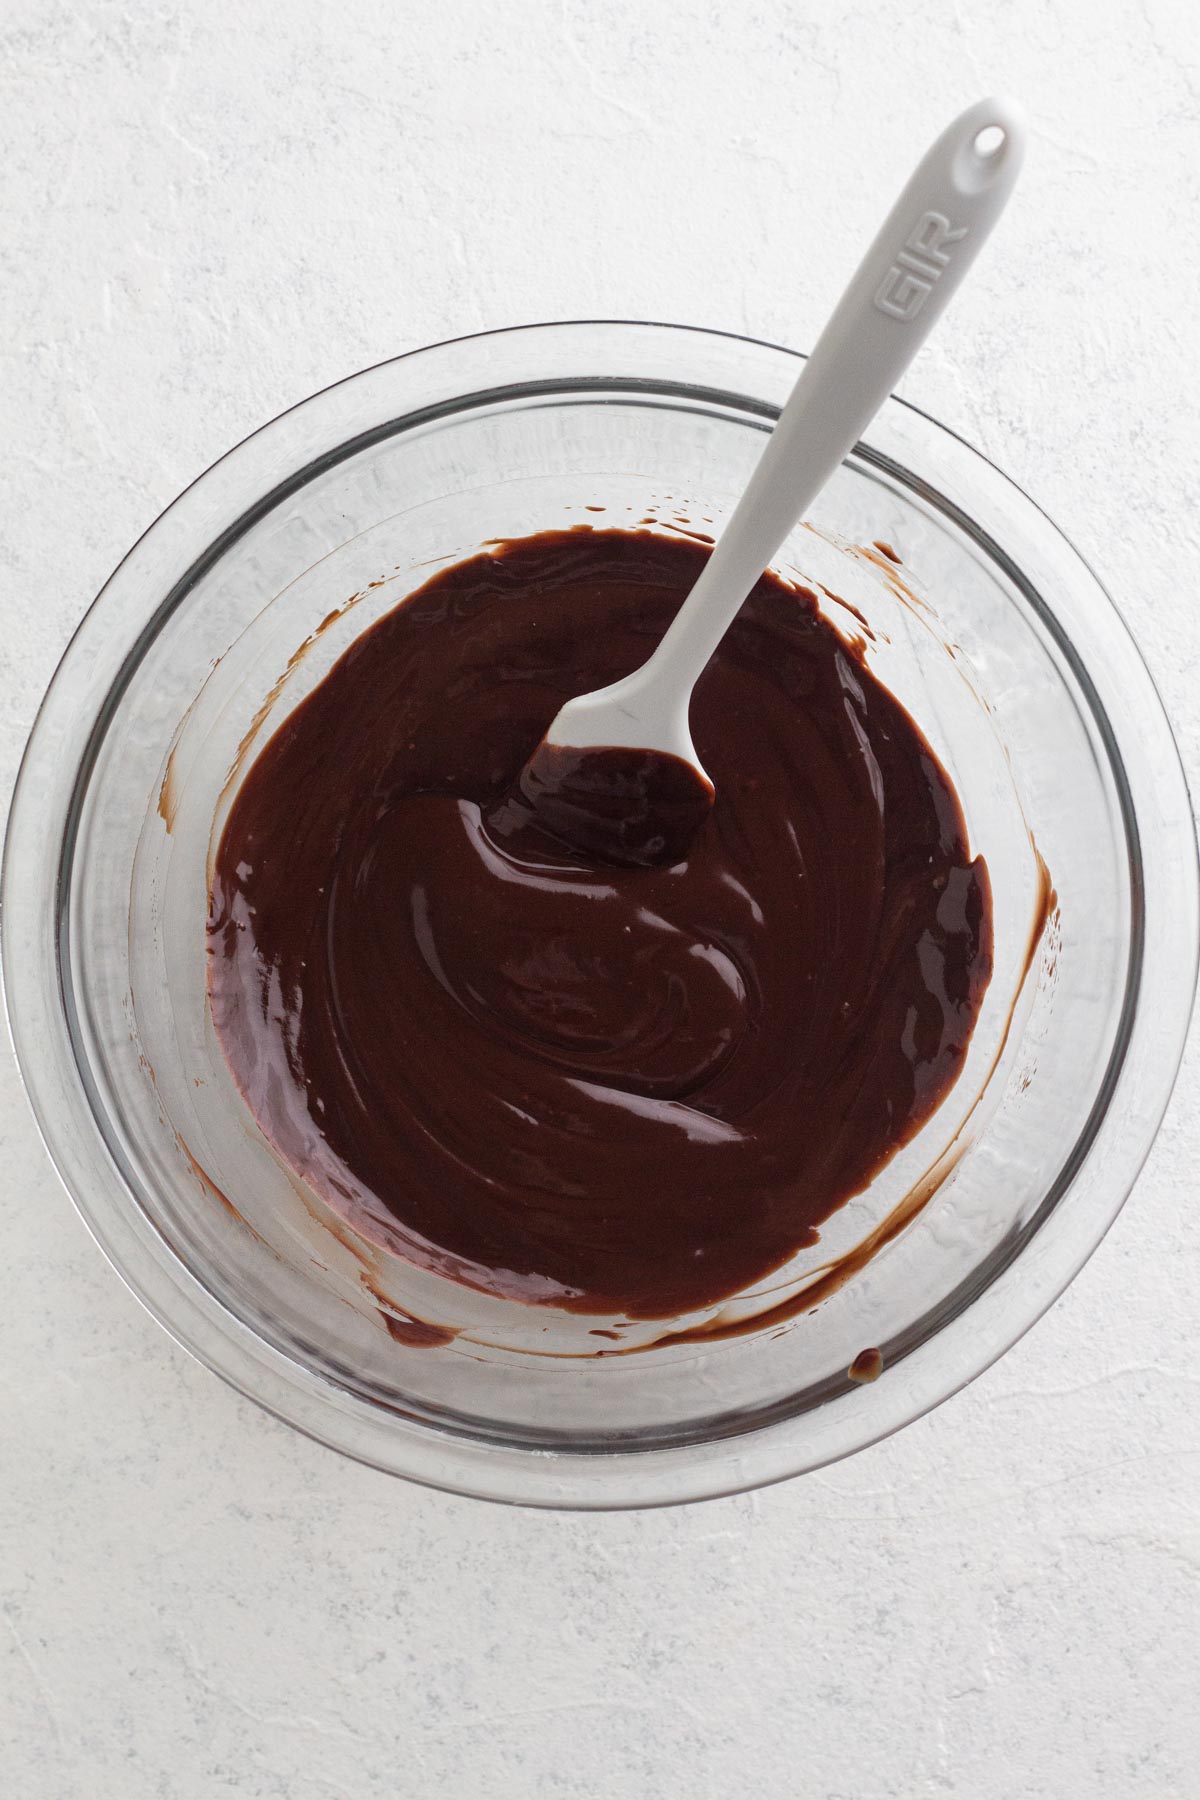 Chocolate ganache in a glass bowl with a spatula.